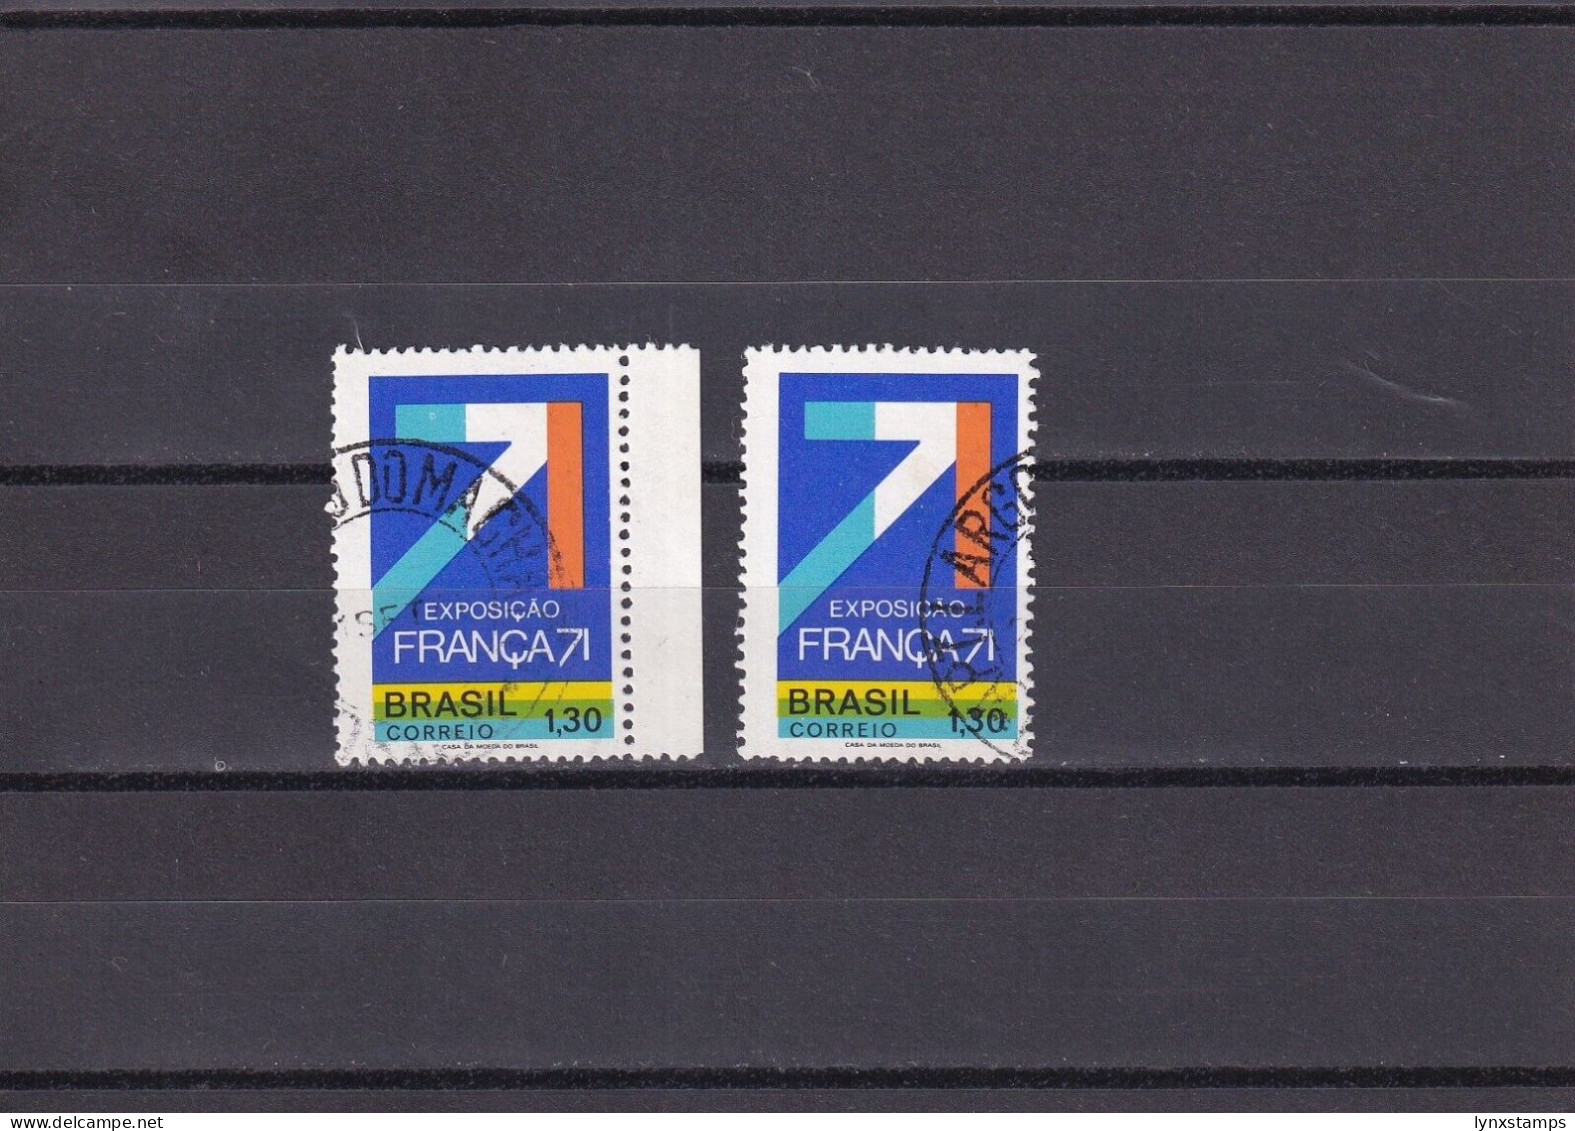 SA06 Brazil 1971 Industrial, Technical And Scientific Exhibition Franca 71 Used - Used Stamps